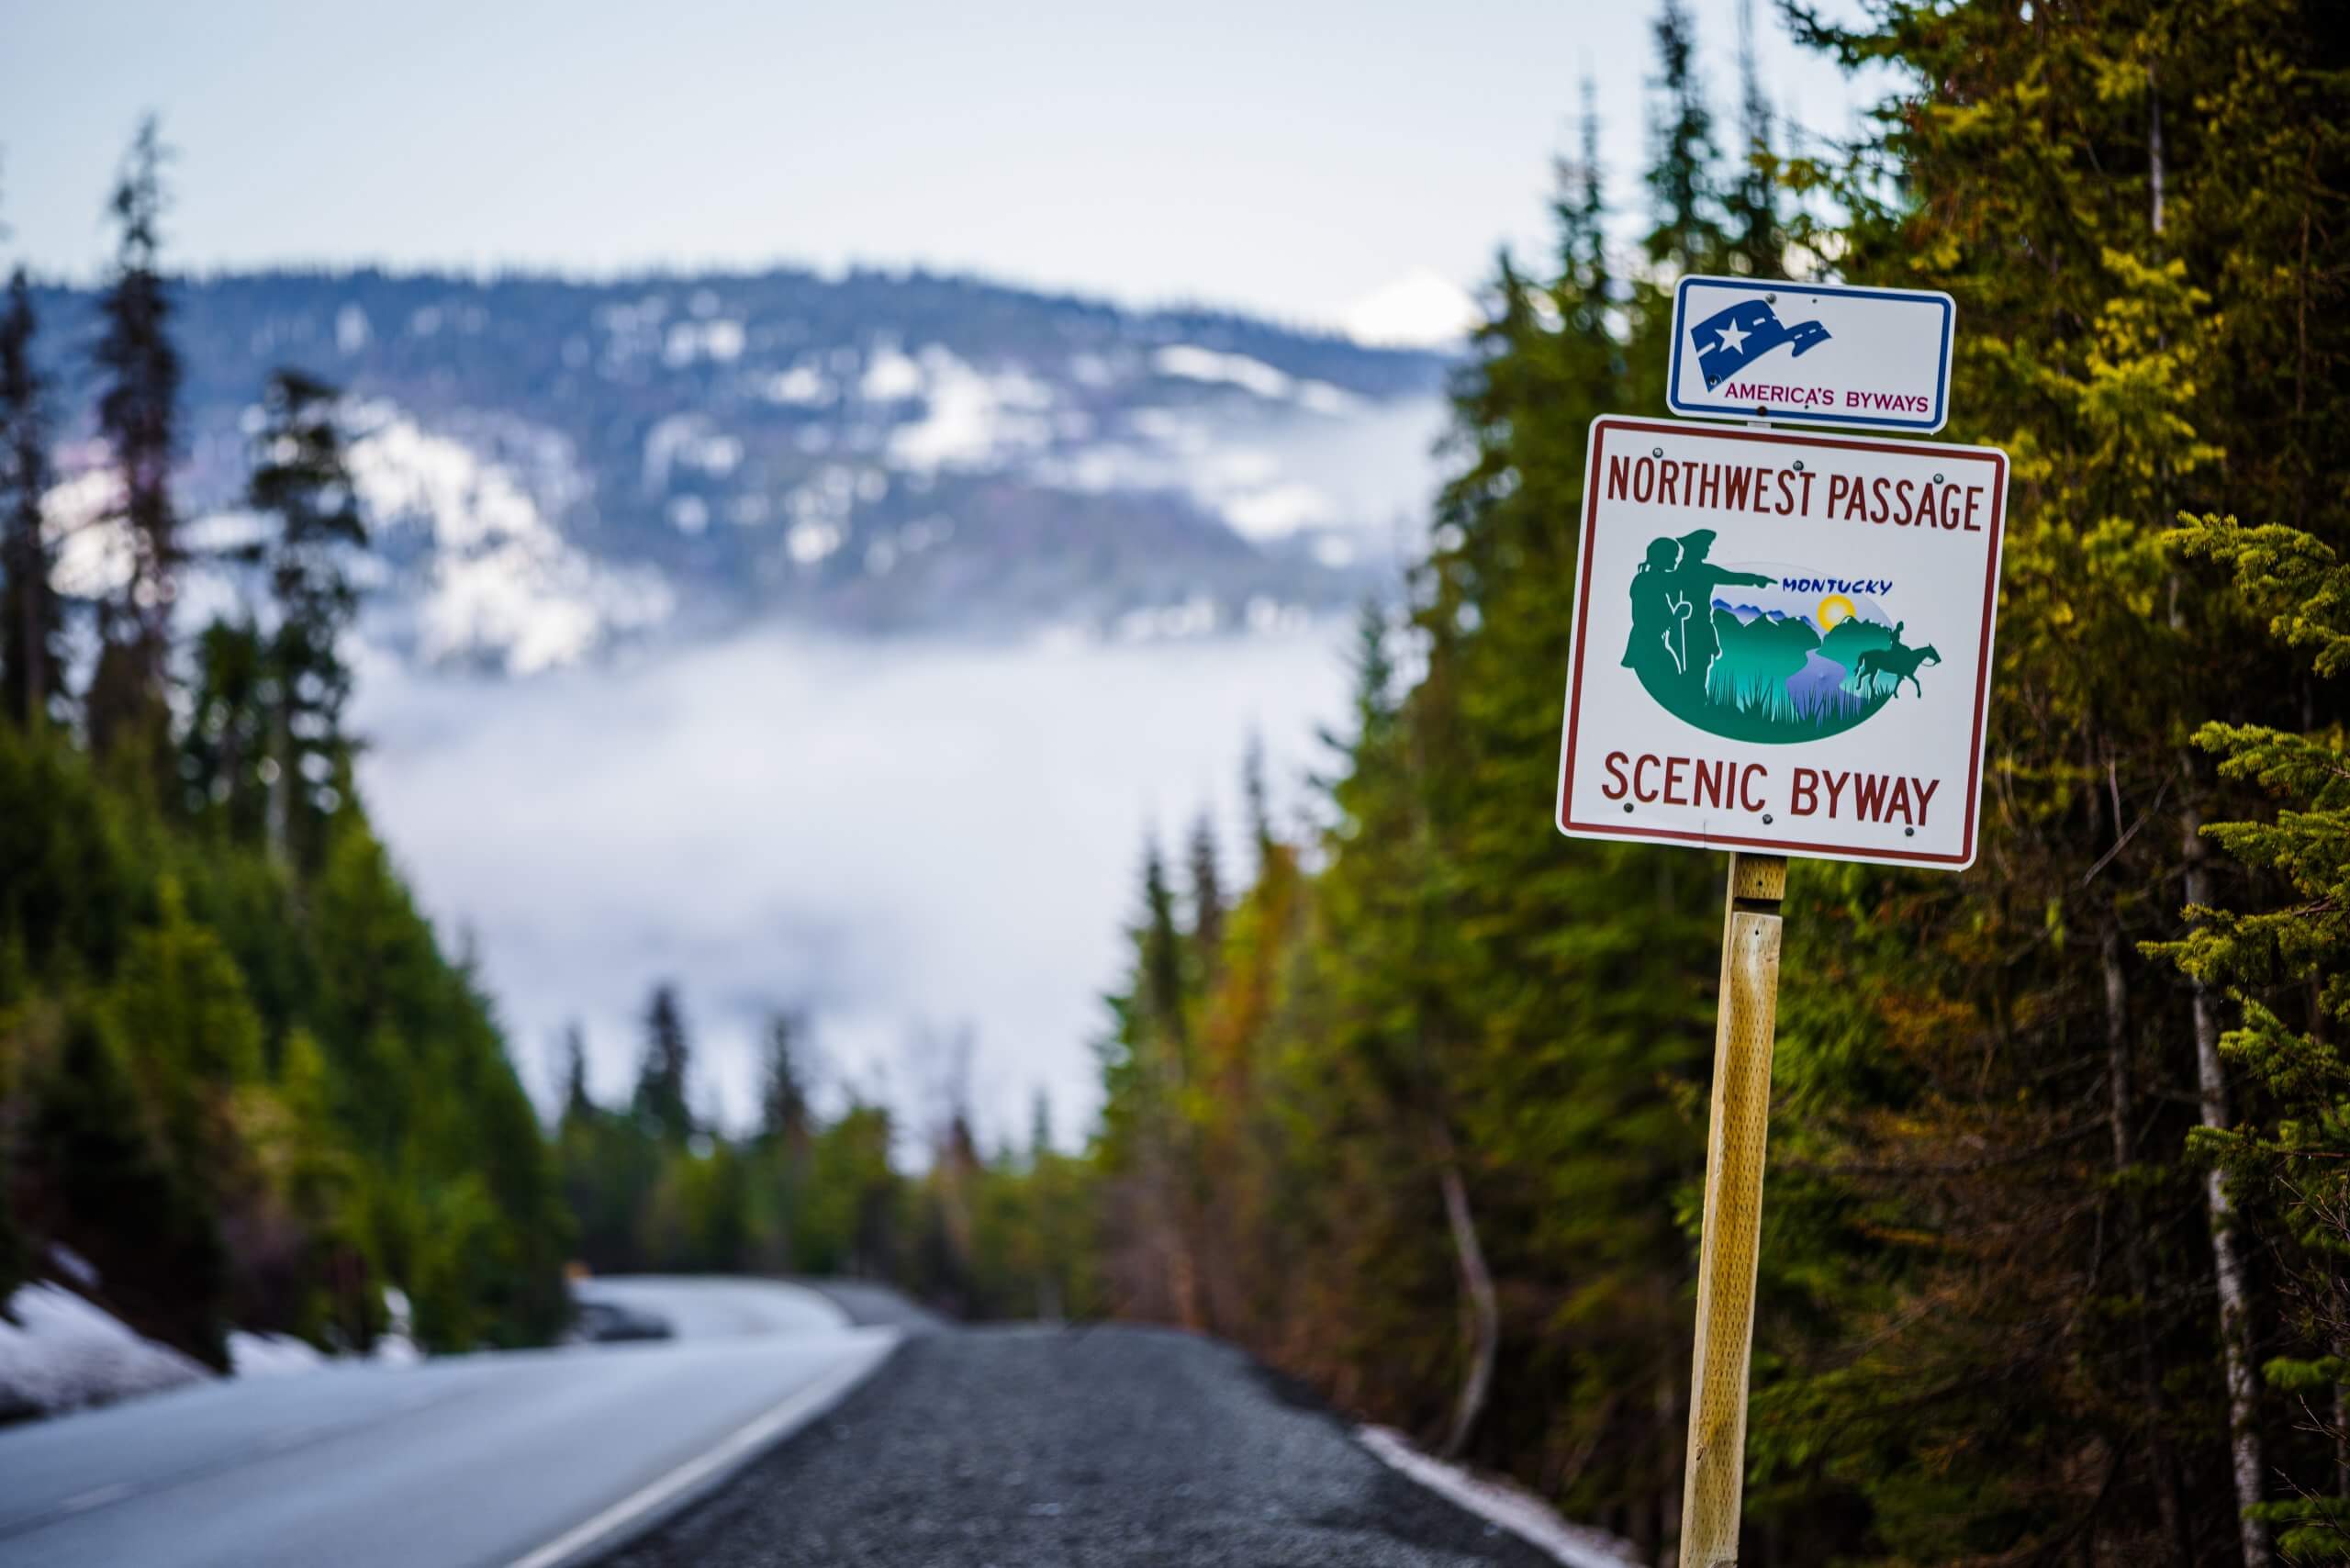 A roadside sign for Northwest Passage Scenic Byway.